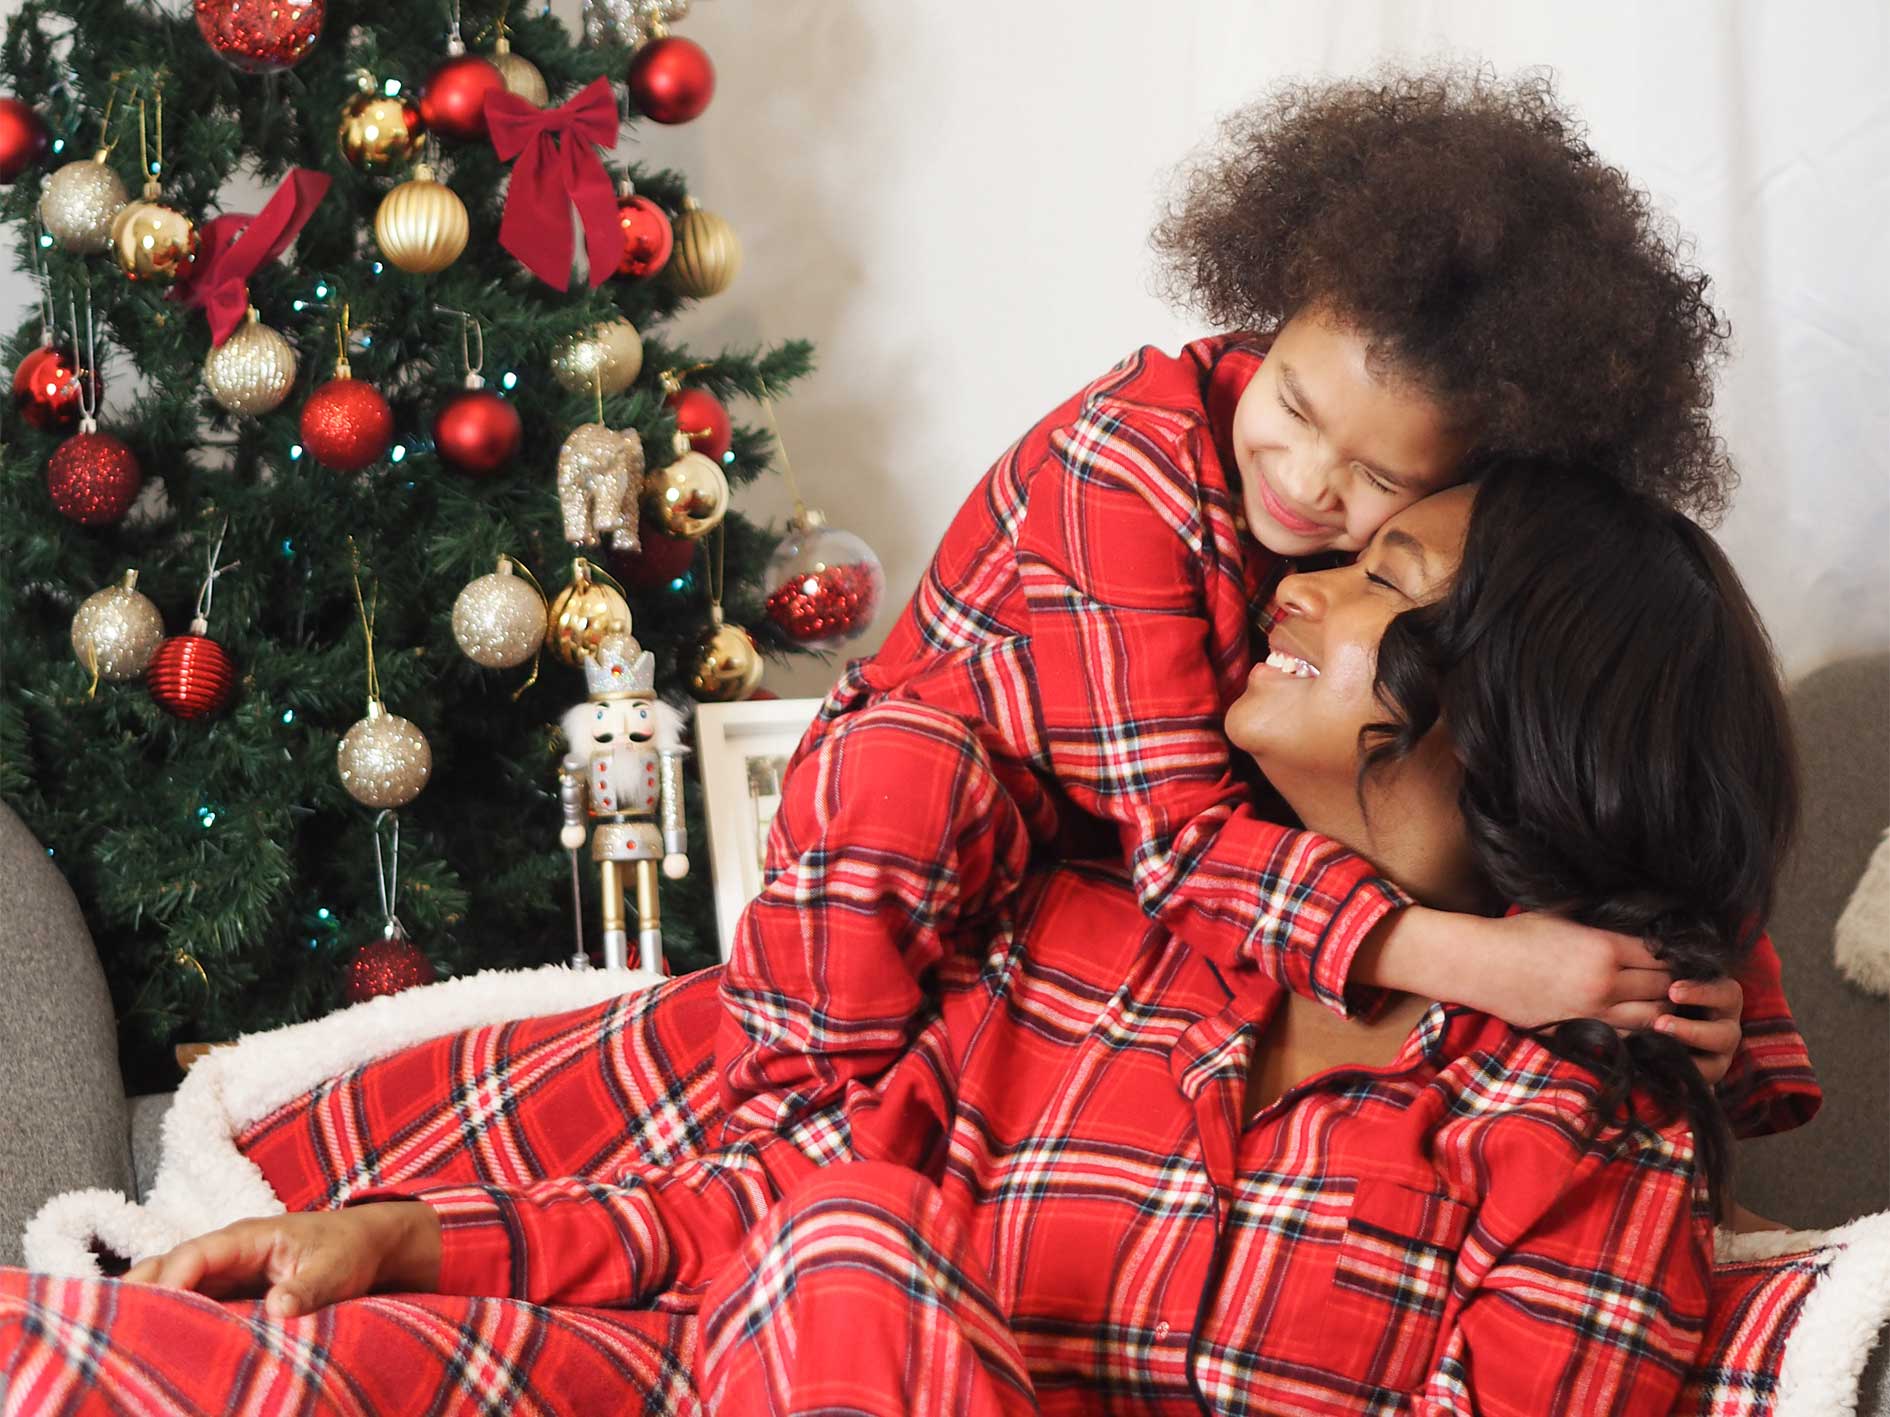 5 tips to help your seasonal campaigns go viral